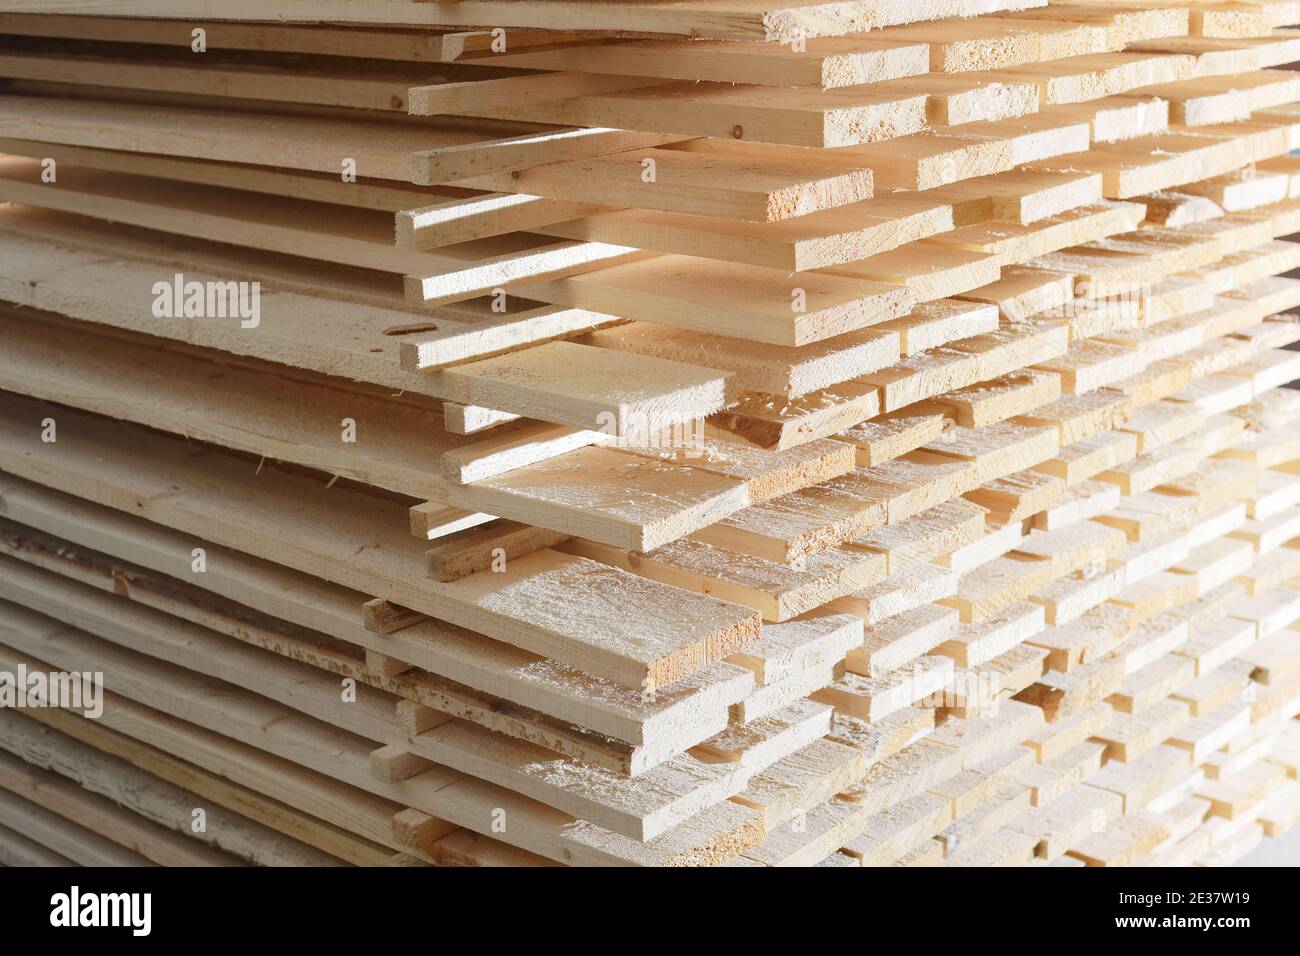 Wooden boards are stacked in a sawmill or carpentry shop. Drying and marketing of wood. Stock Photo